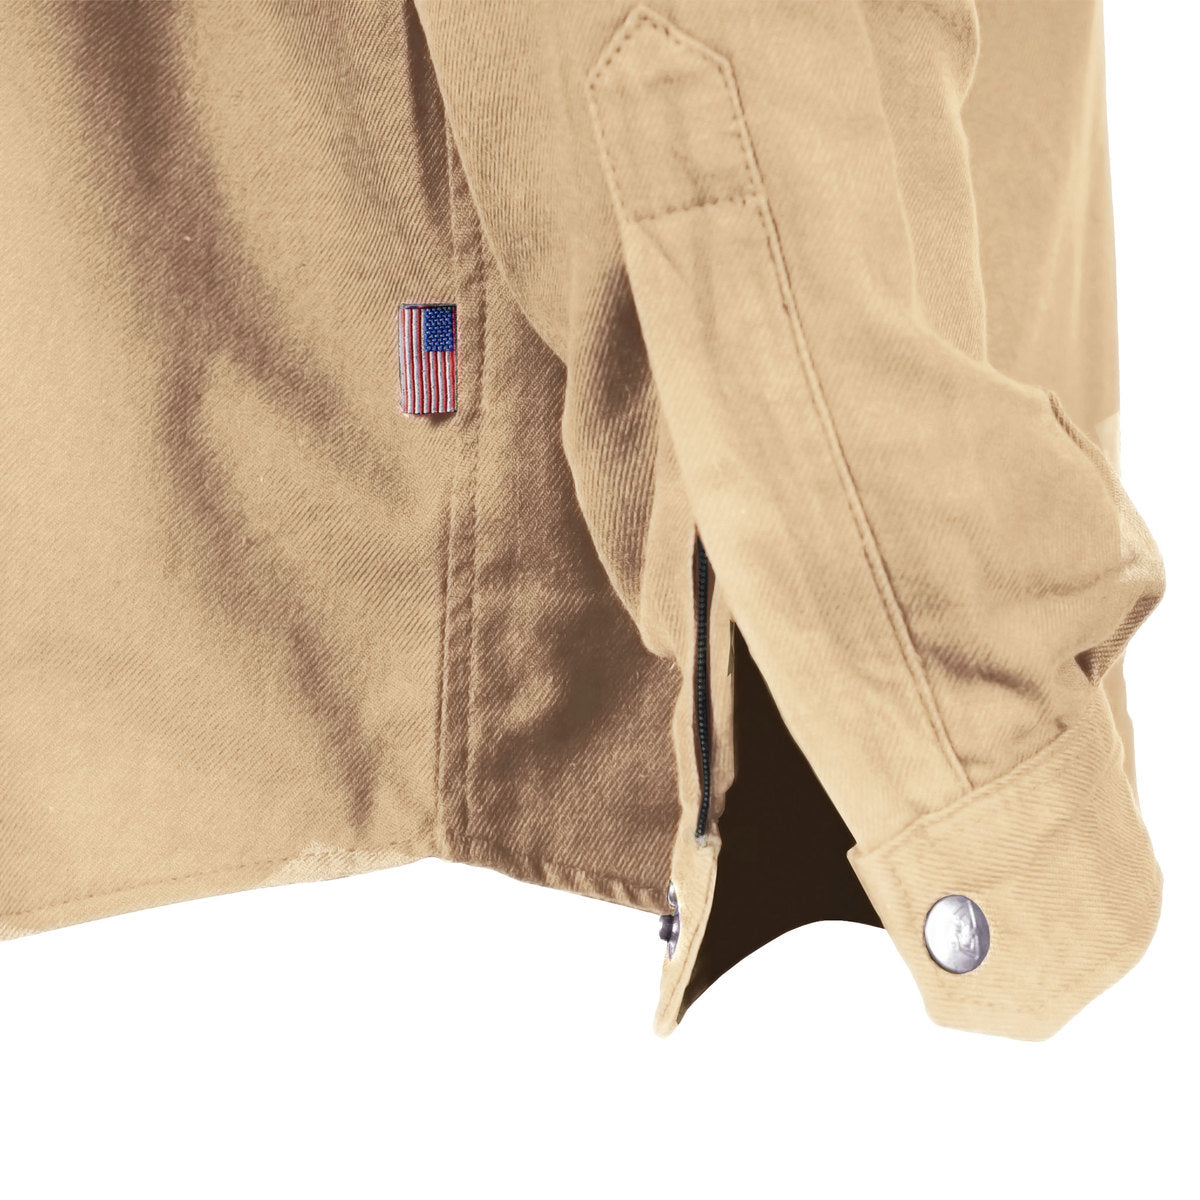 Protective Flannel Shirt - Khaki Solid with Pads